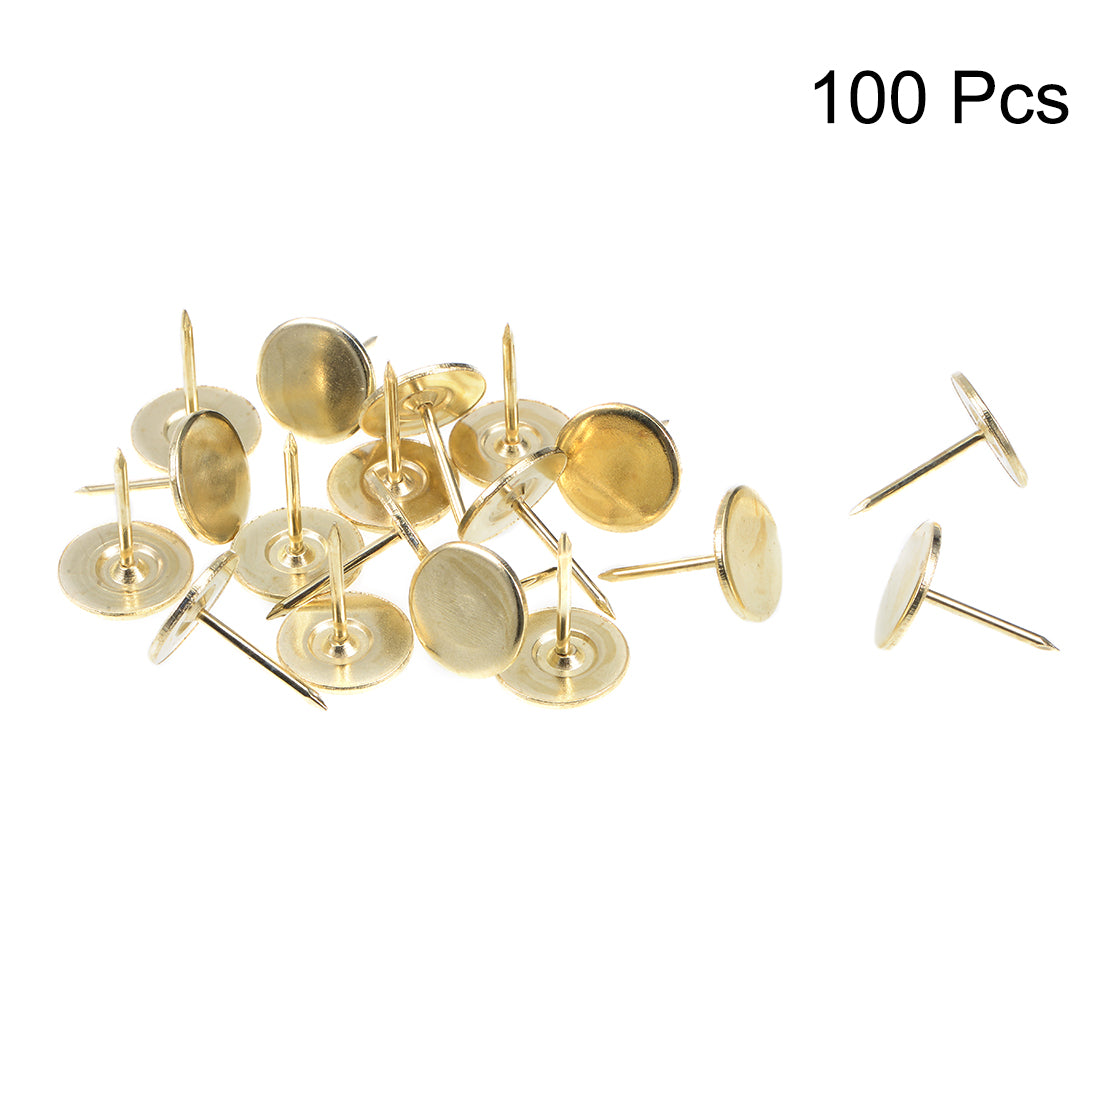 uxcell Uxcell Upholstery Nails Tacks 19mmx30mm Flat Head Furniture Nails Gold Tone 100 Pcs